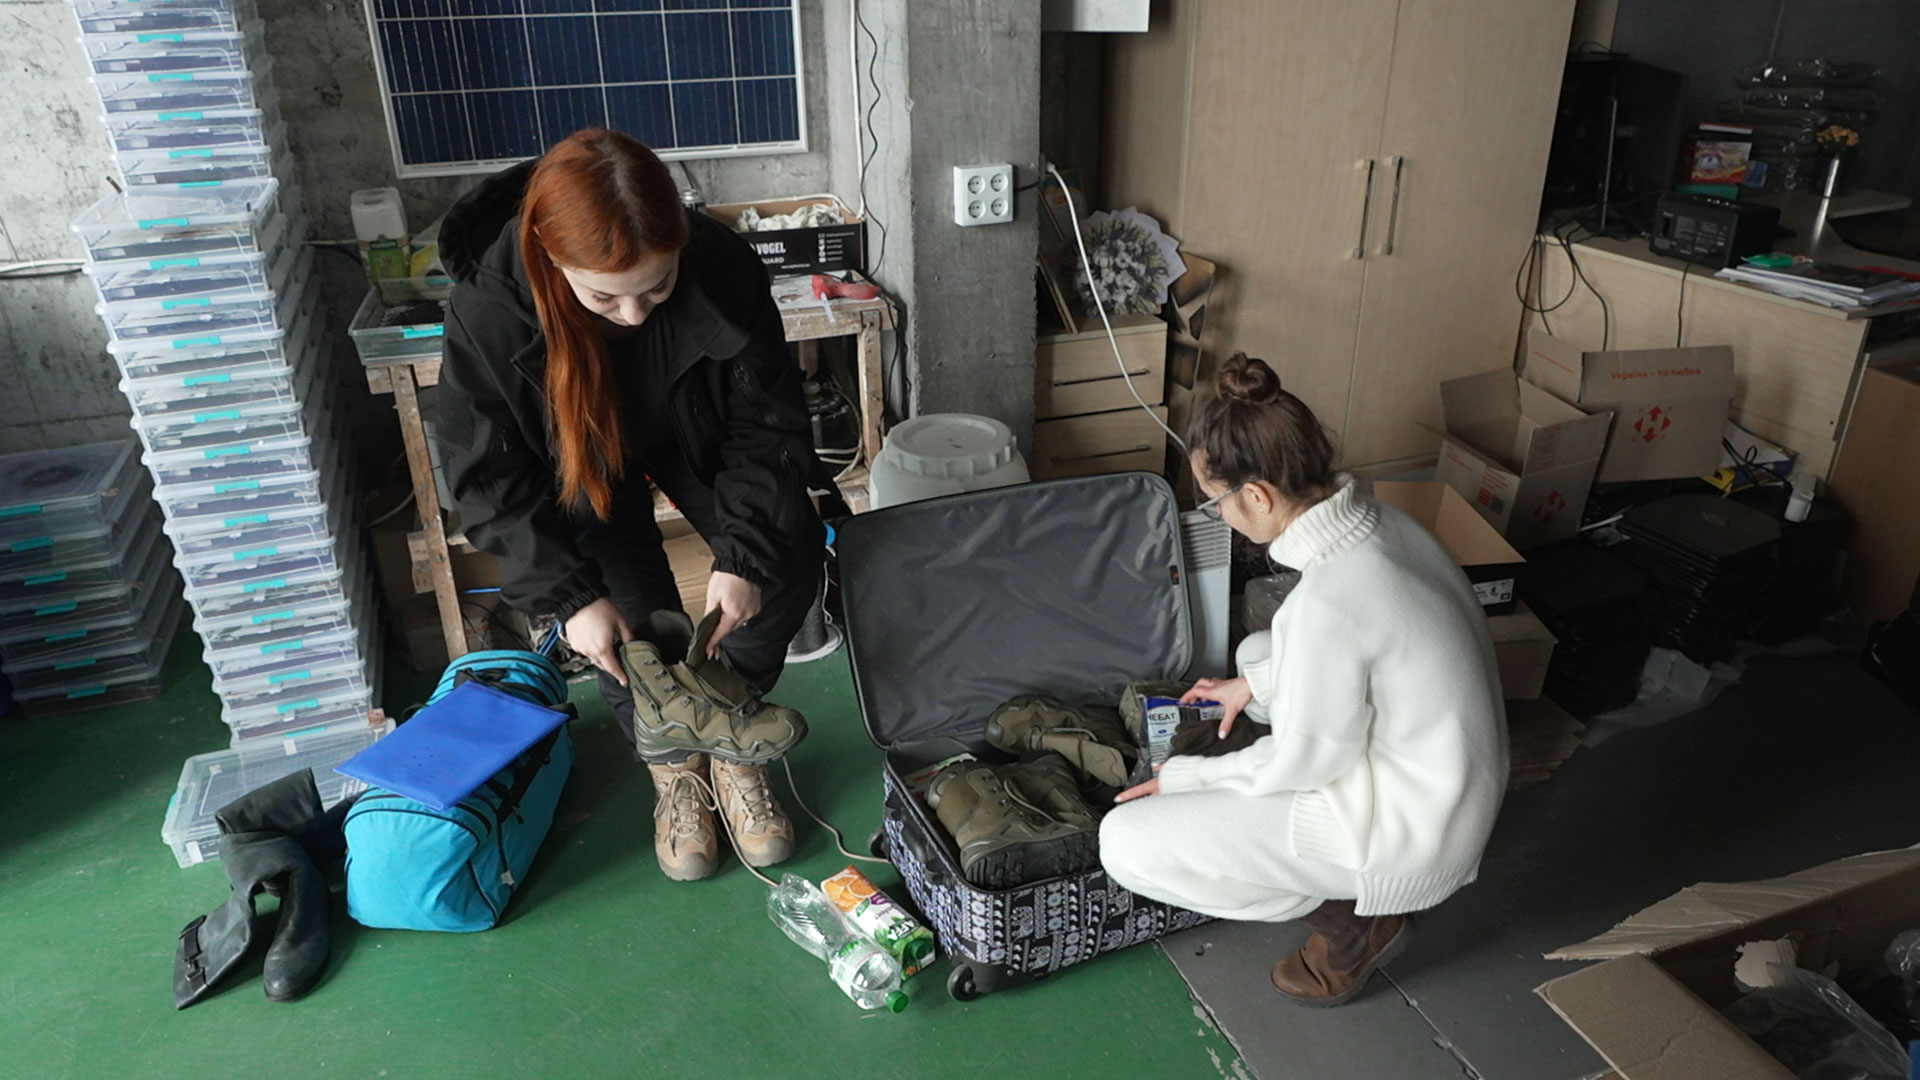 Roksolana, left, tries on her new boots while Kseniia Drahanyuk, the co-founder of the Zemlyachki NGO, helps her fill a suitcase with various items.